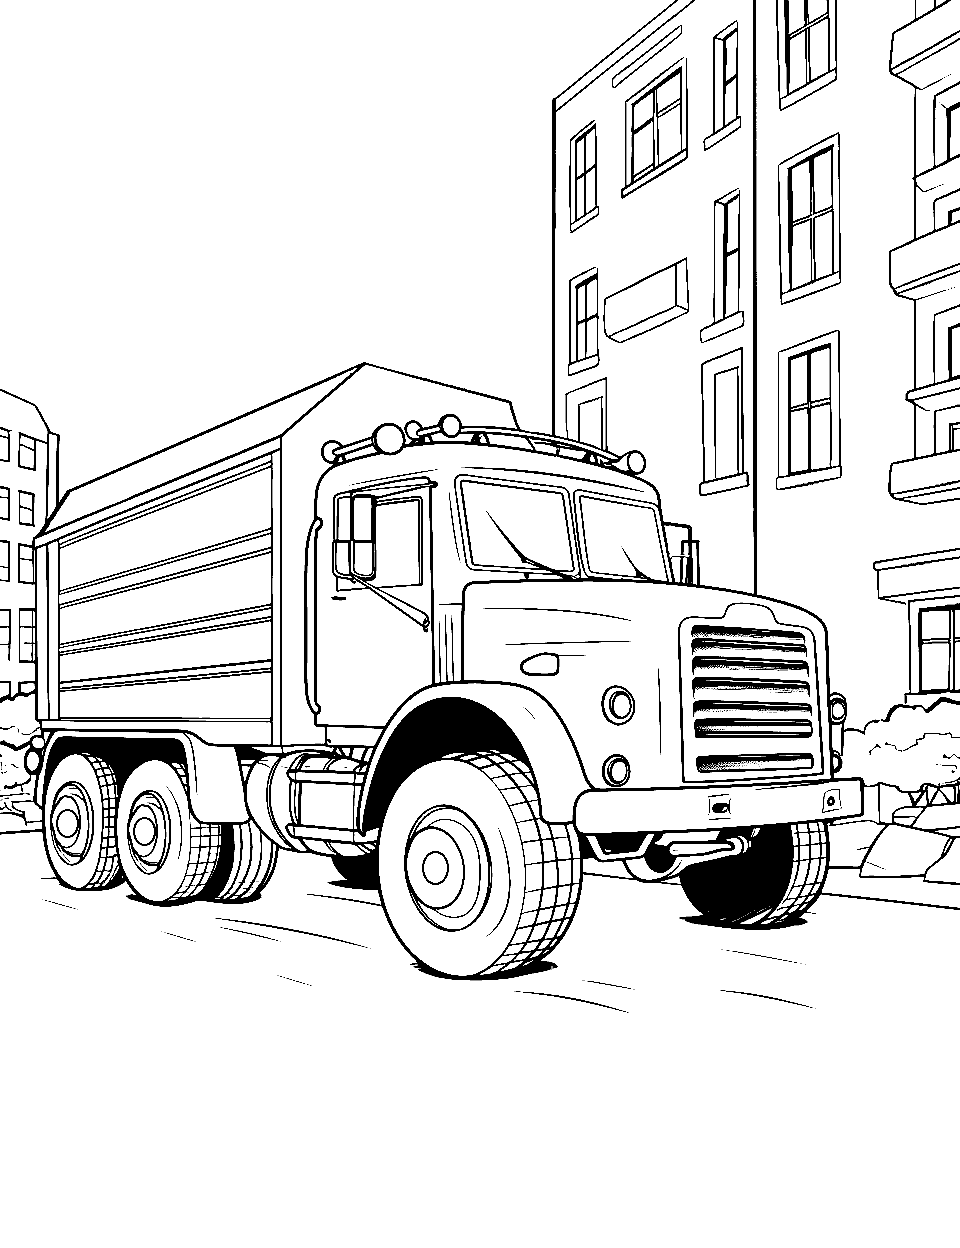 Armored Bank Truck Coloring Page - An armored truck safely transporting money bags in a quiet city street.